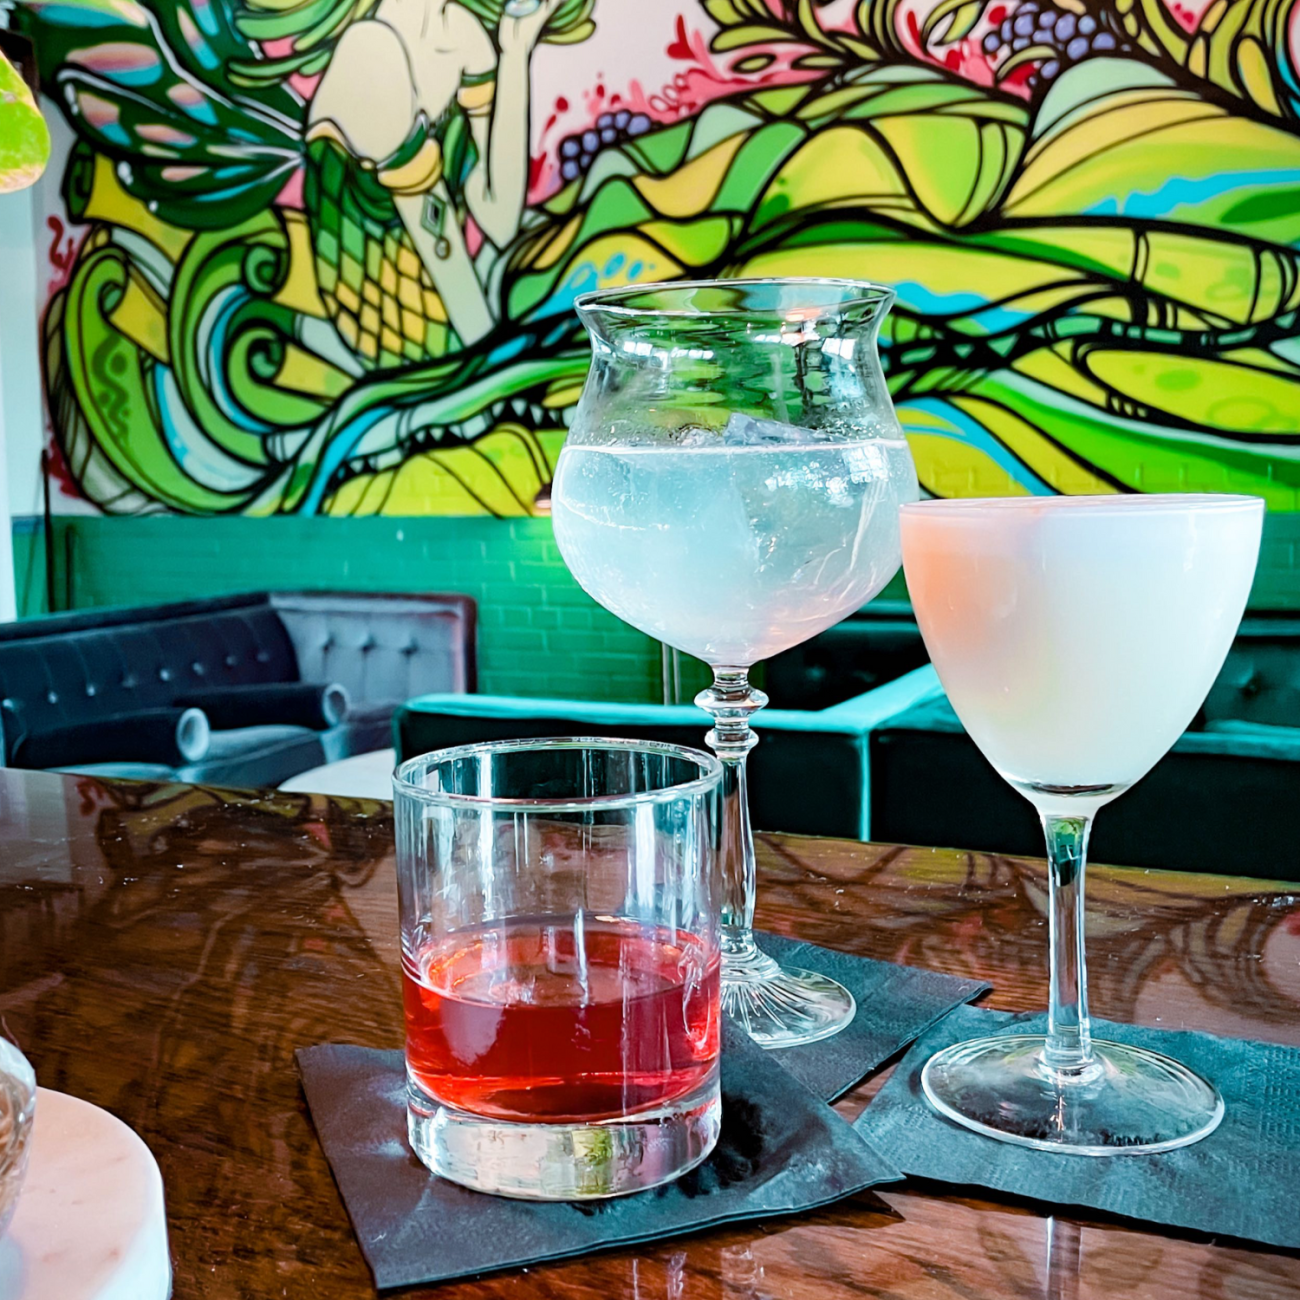 Three cocktails on a table, a colorful green mural in background.